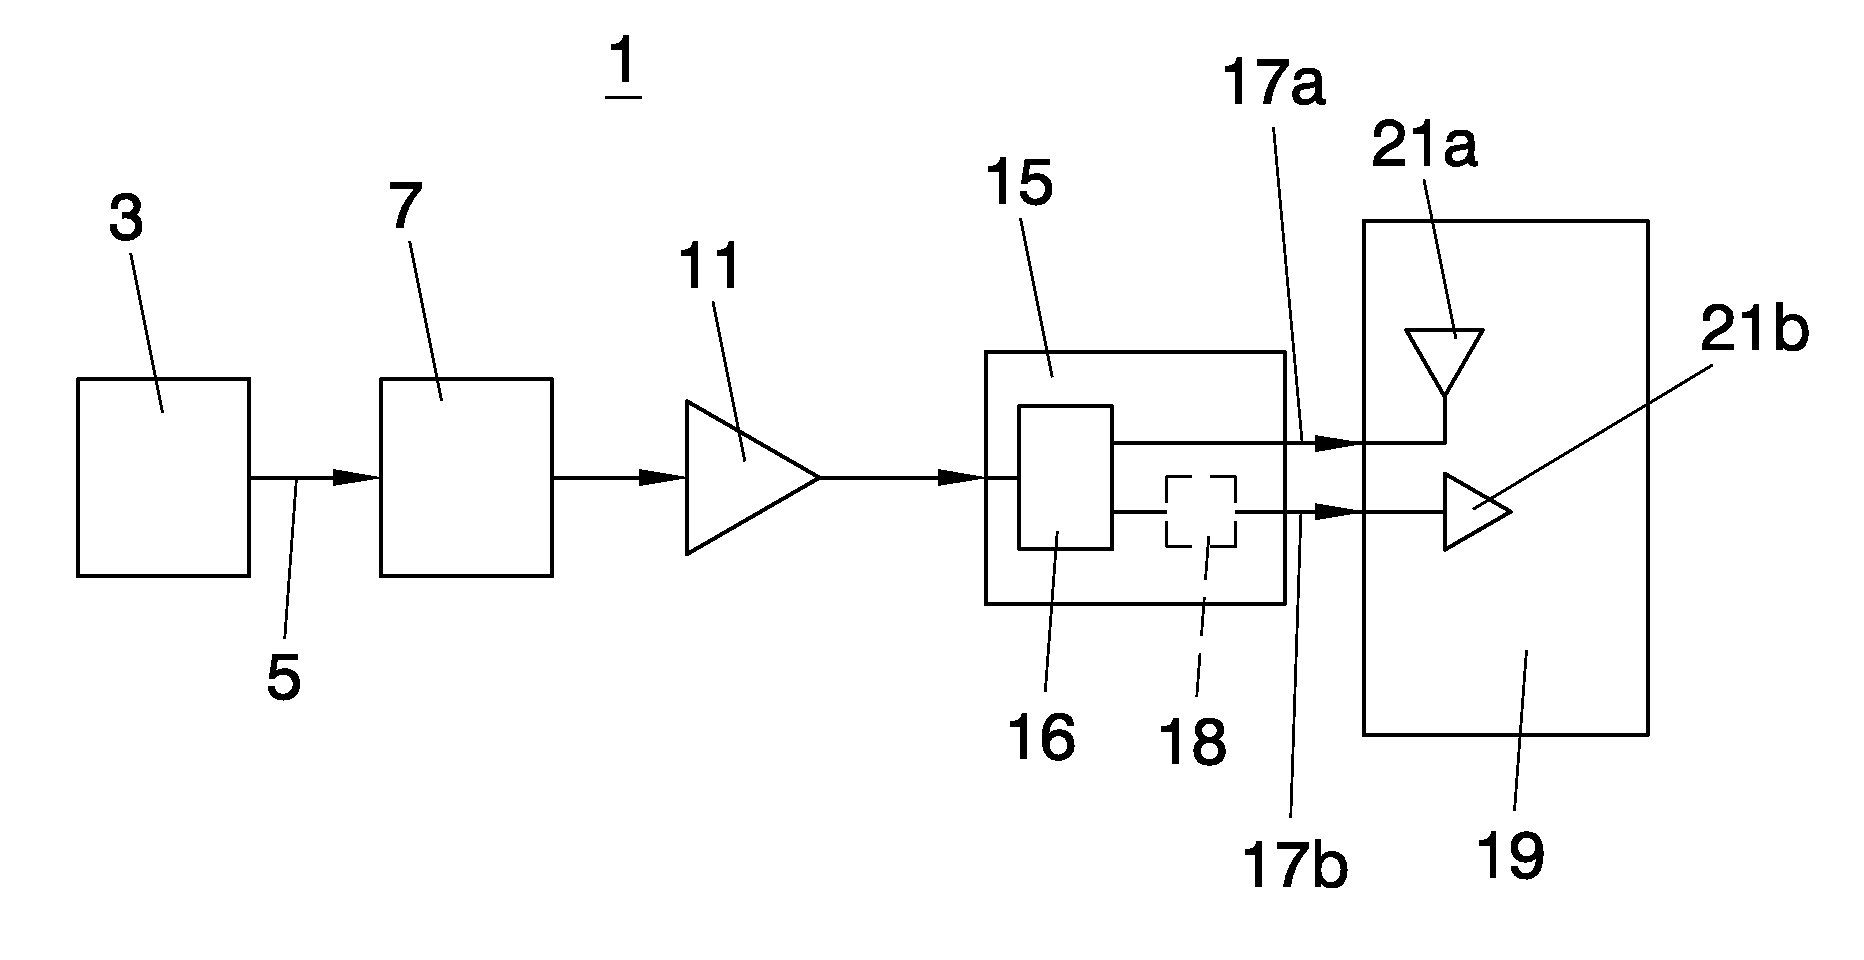 Transmitting a Radio Signal in a Mobile Communication Network